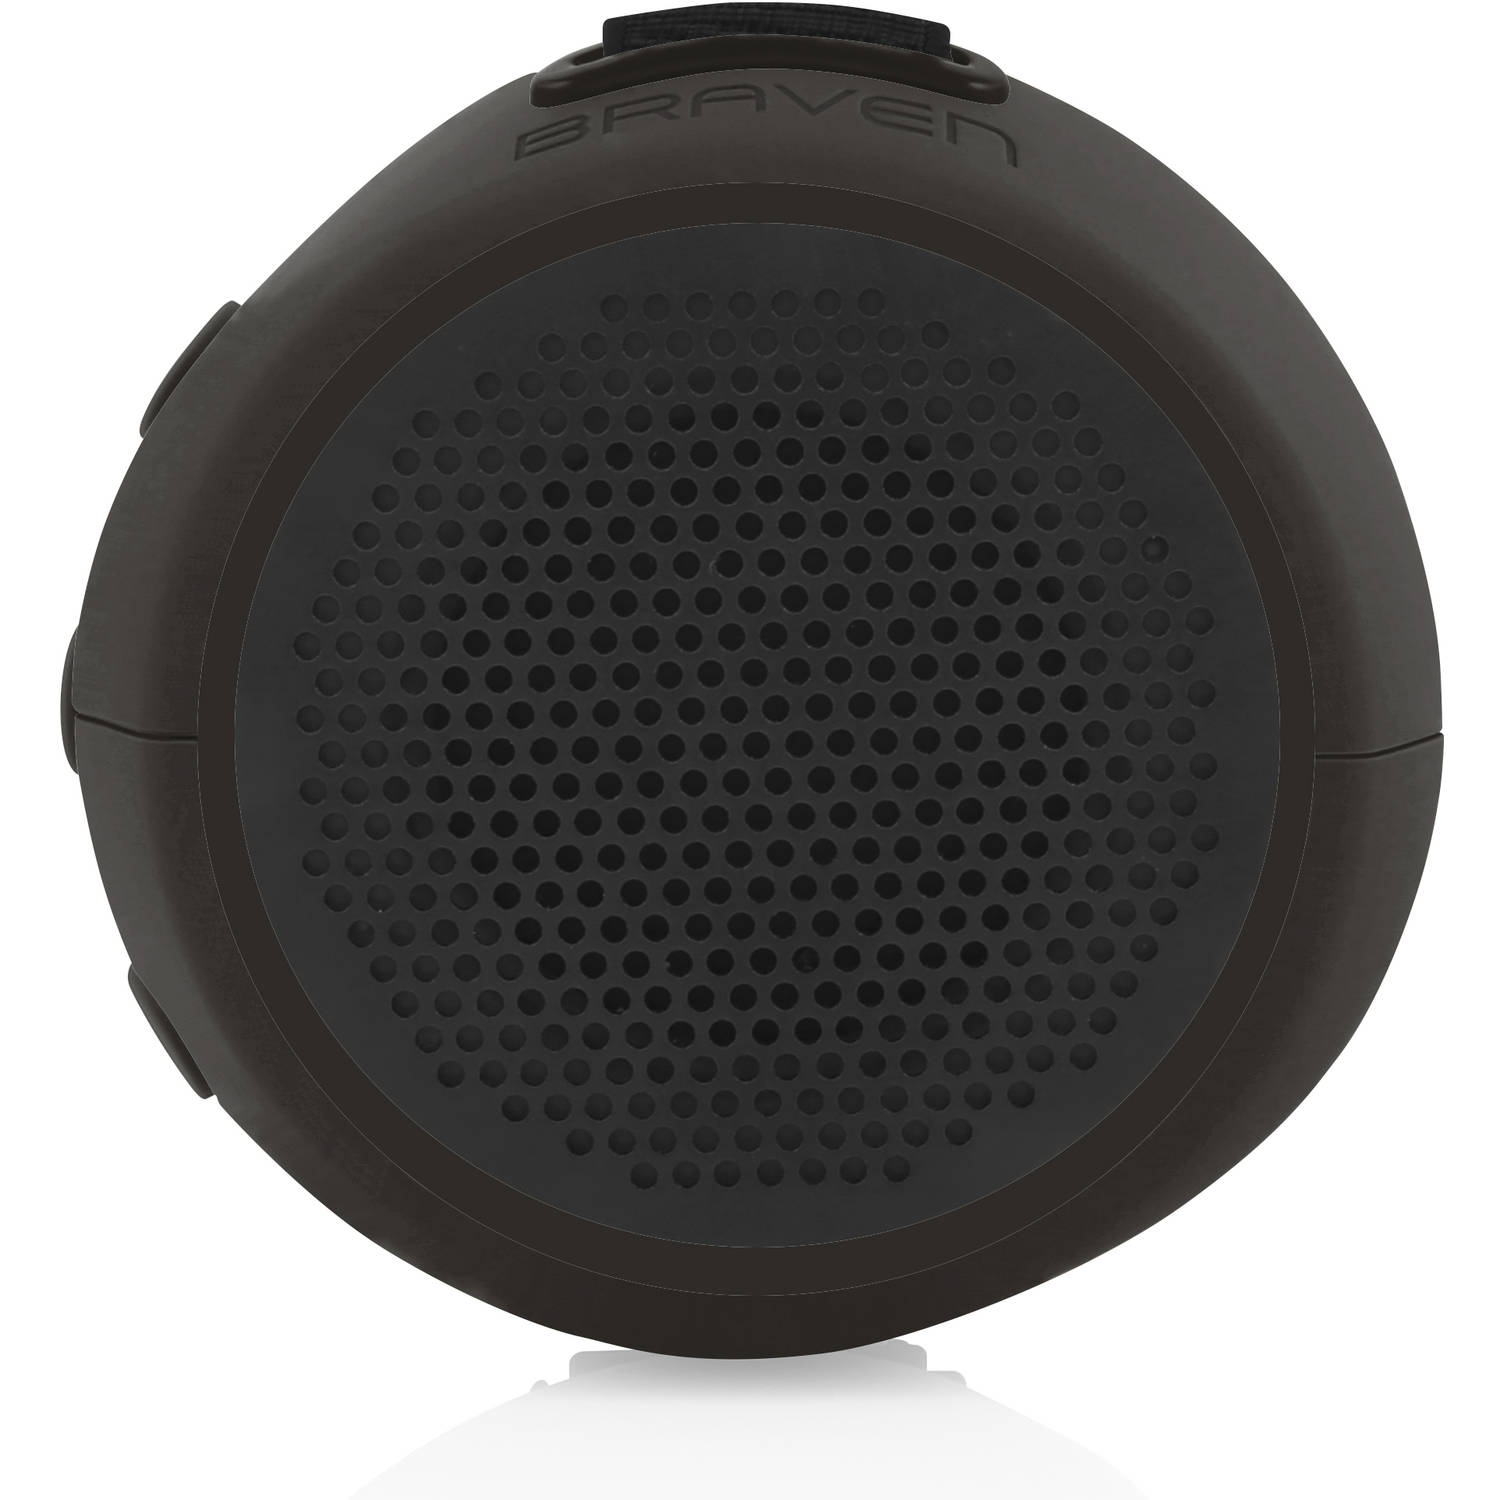 Today only: Braven 105 wireless portable Bluetooth speaker for $20